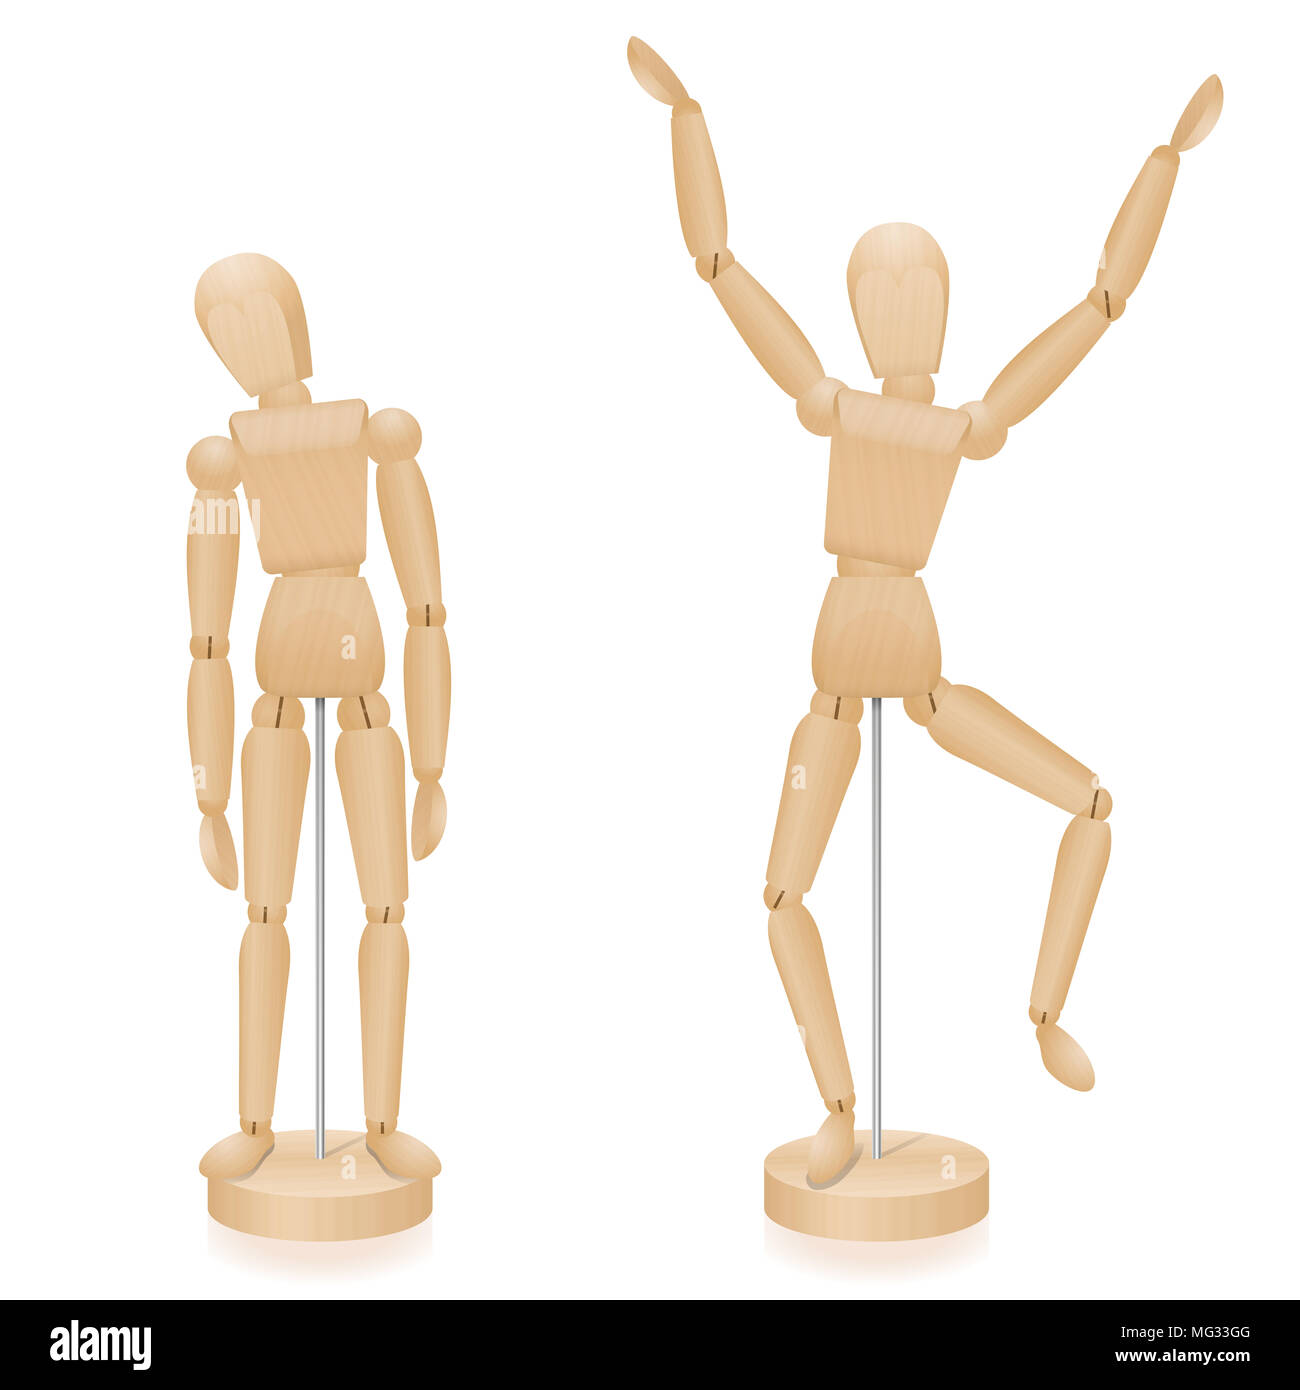 Unhappy and happy, sad and joyful wooden lay figures body language in comparison - two mannequins with typical body posture. Stock Photo